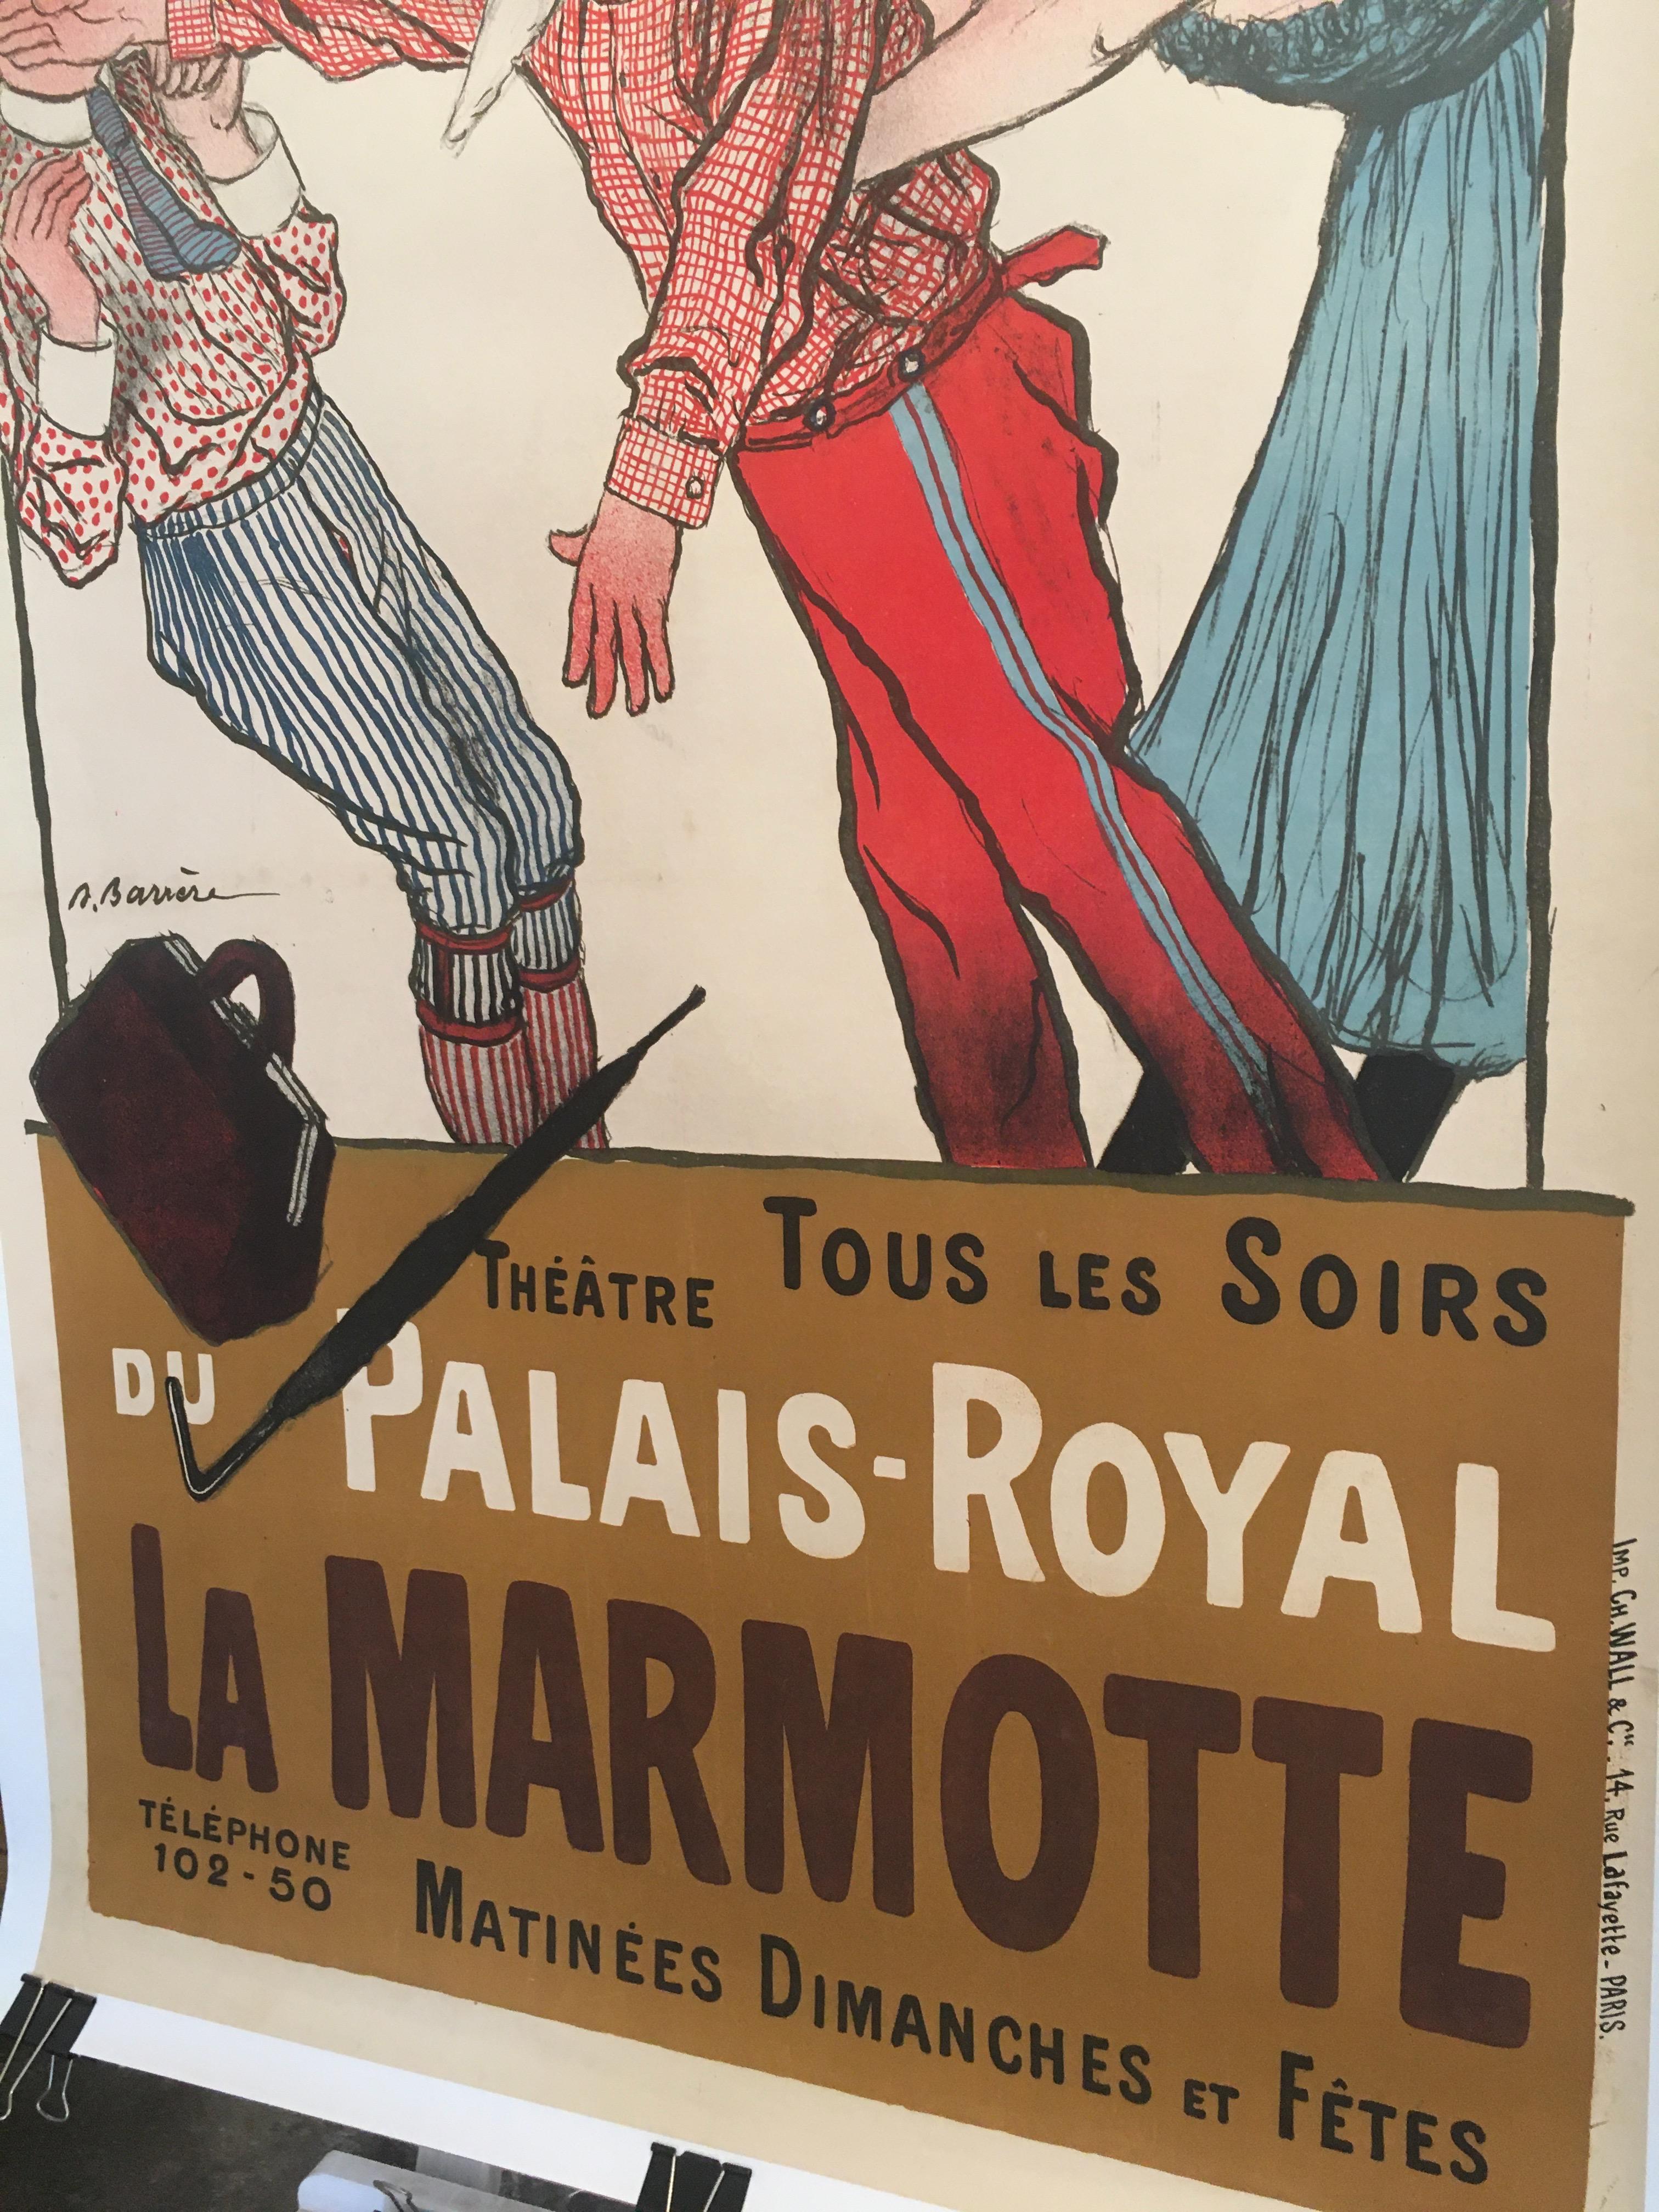 early 20th century posters